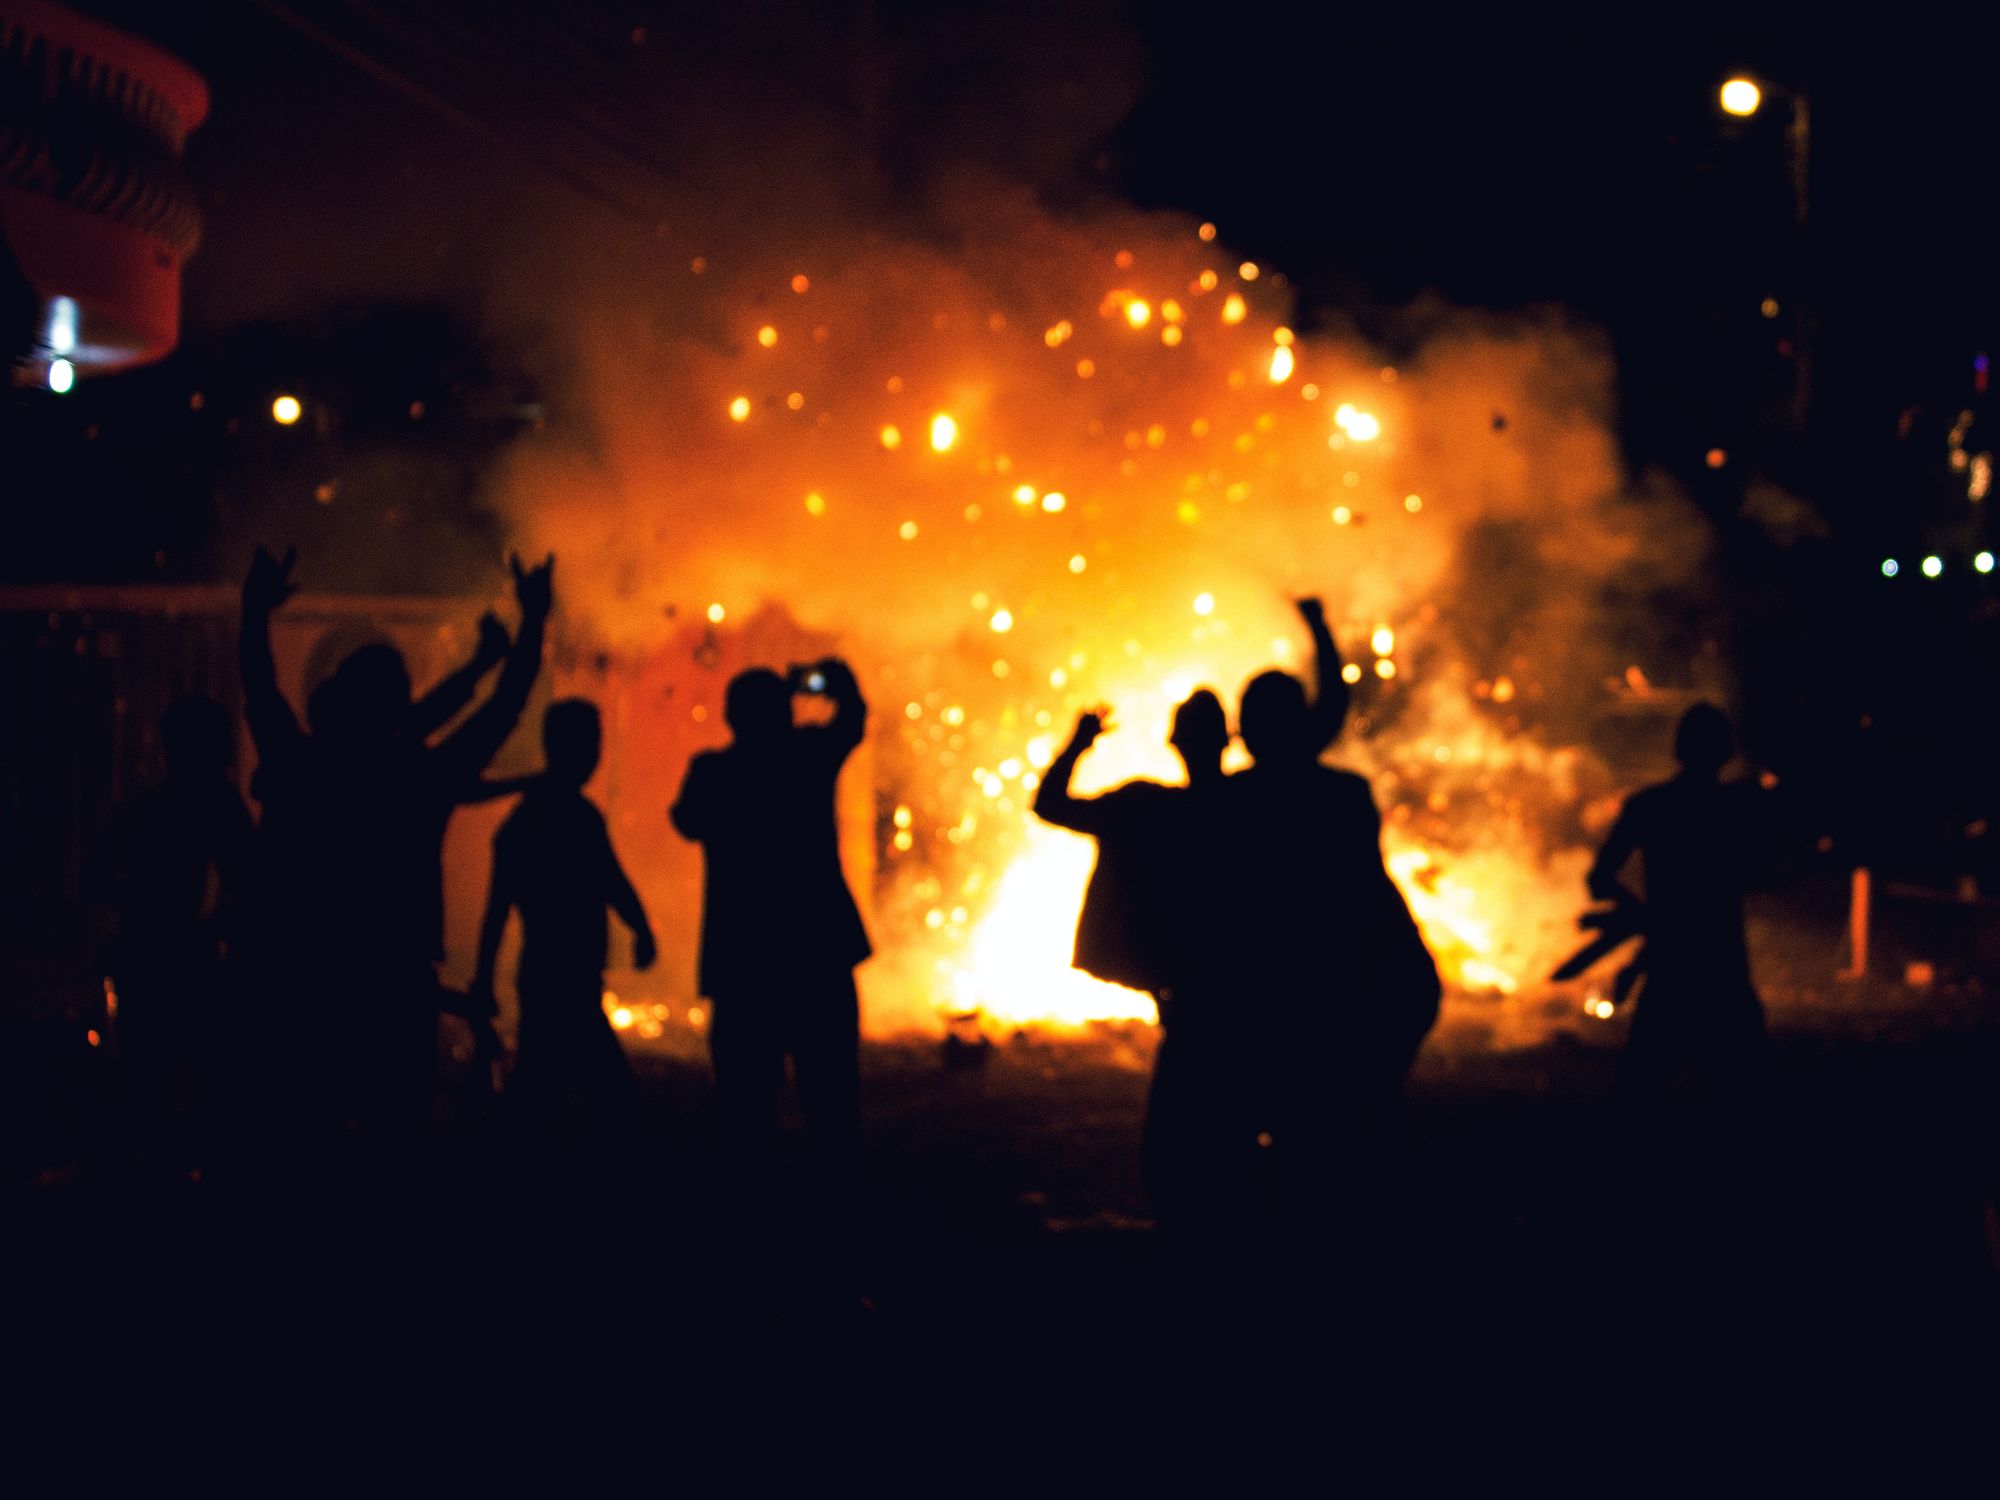 Photo of people gathered round a fire with scattering embers, arms raised.